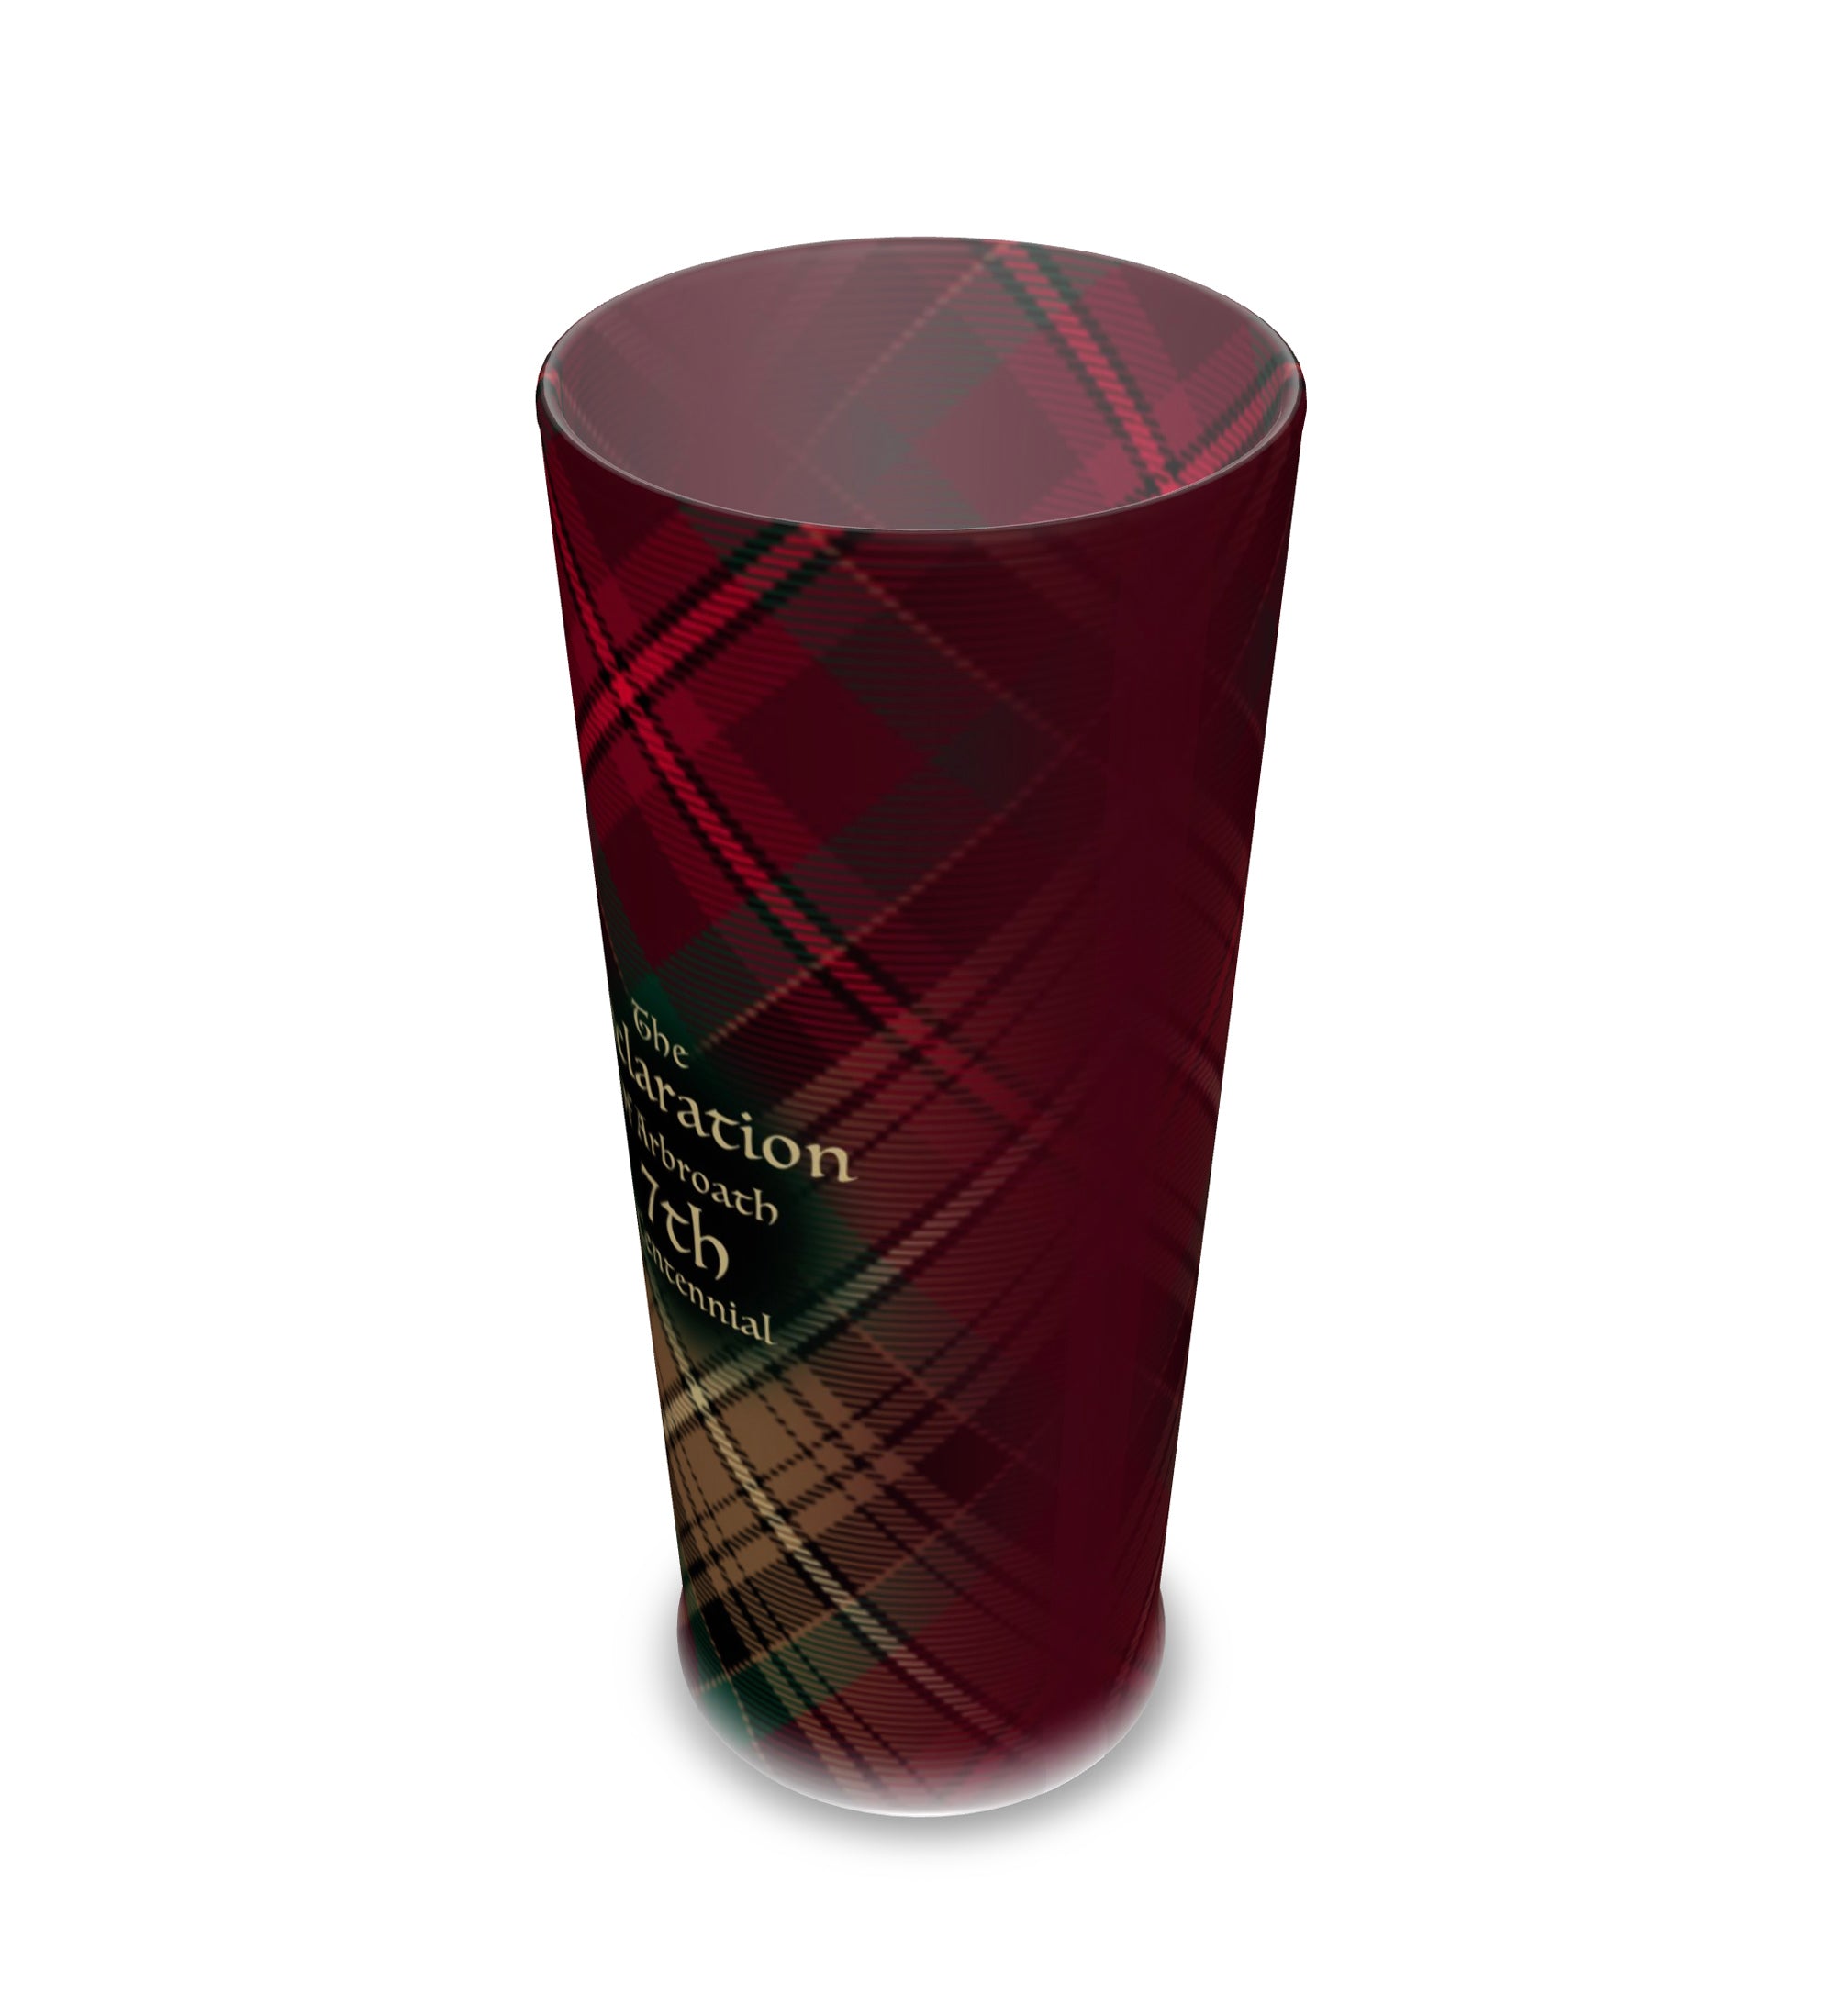 Declaration of Arbroath 7th Centennial - Frosted Beer Glass - the tartan fading into maroon